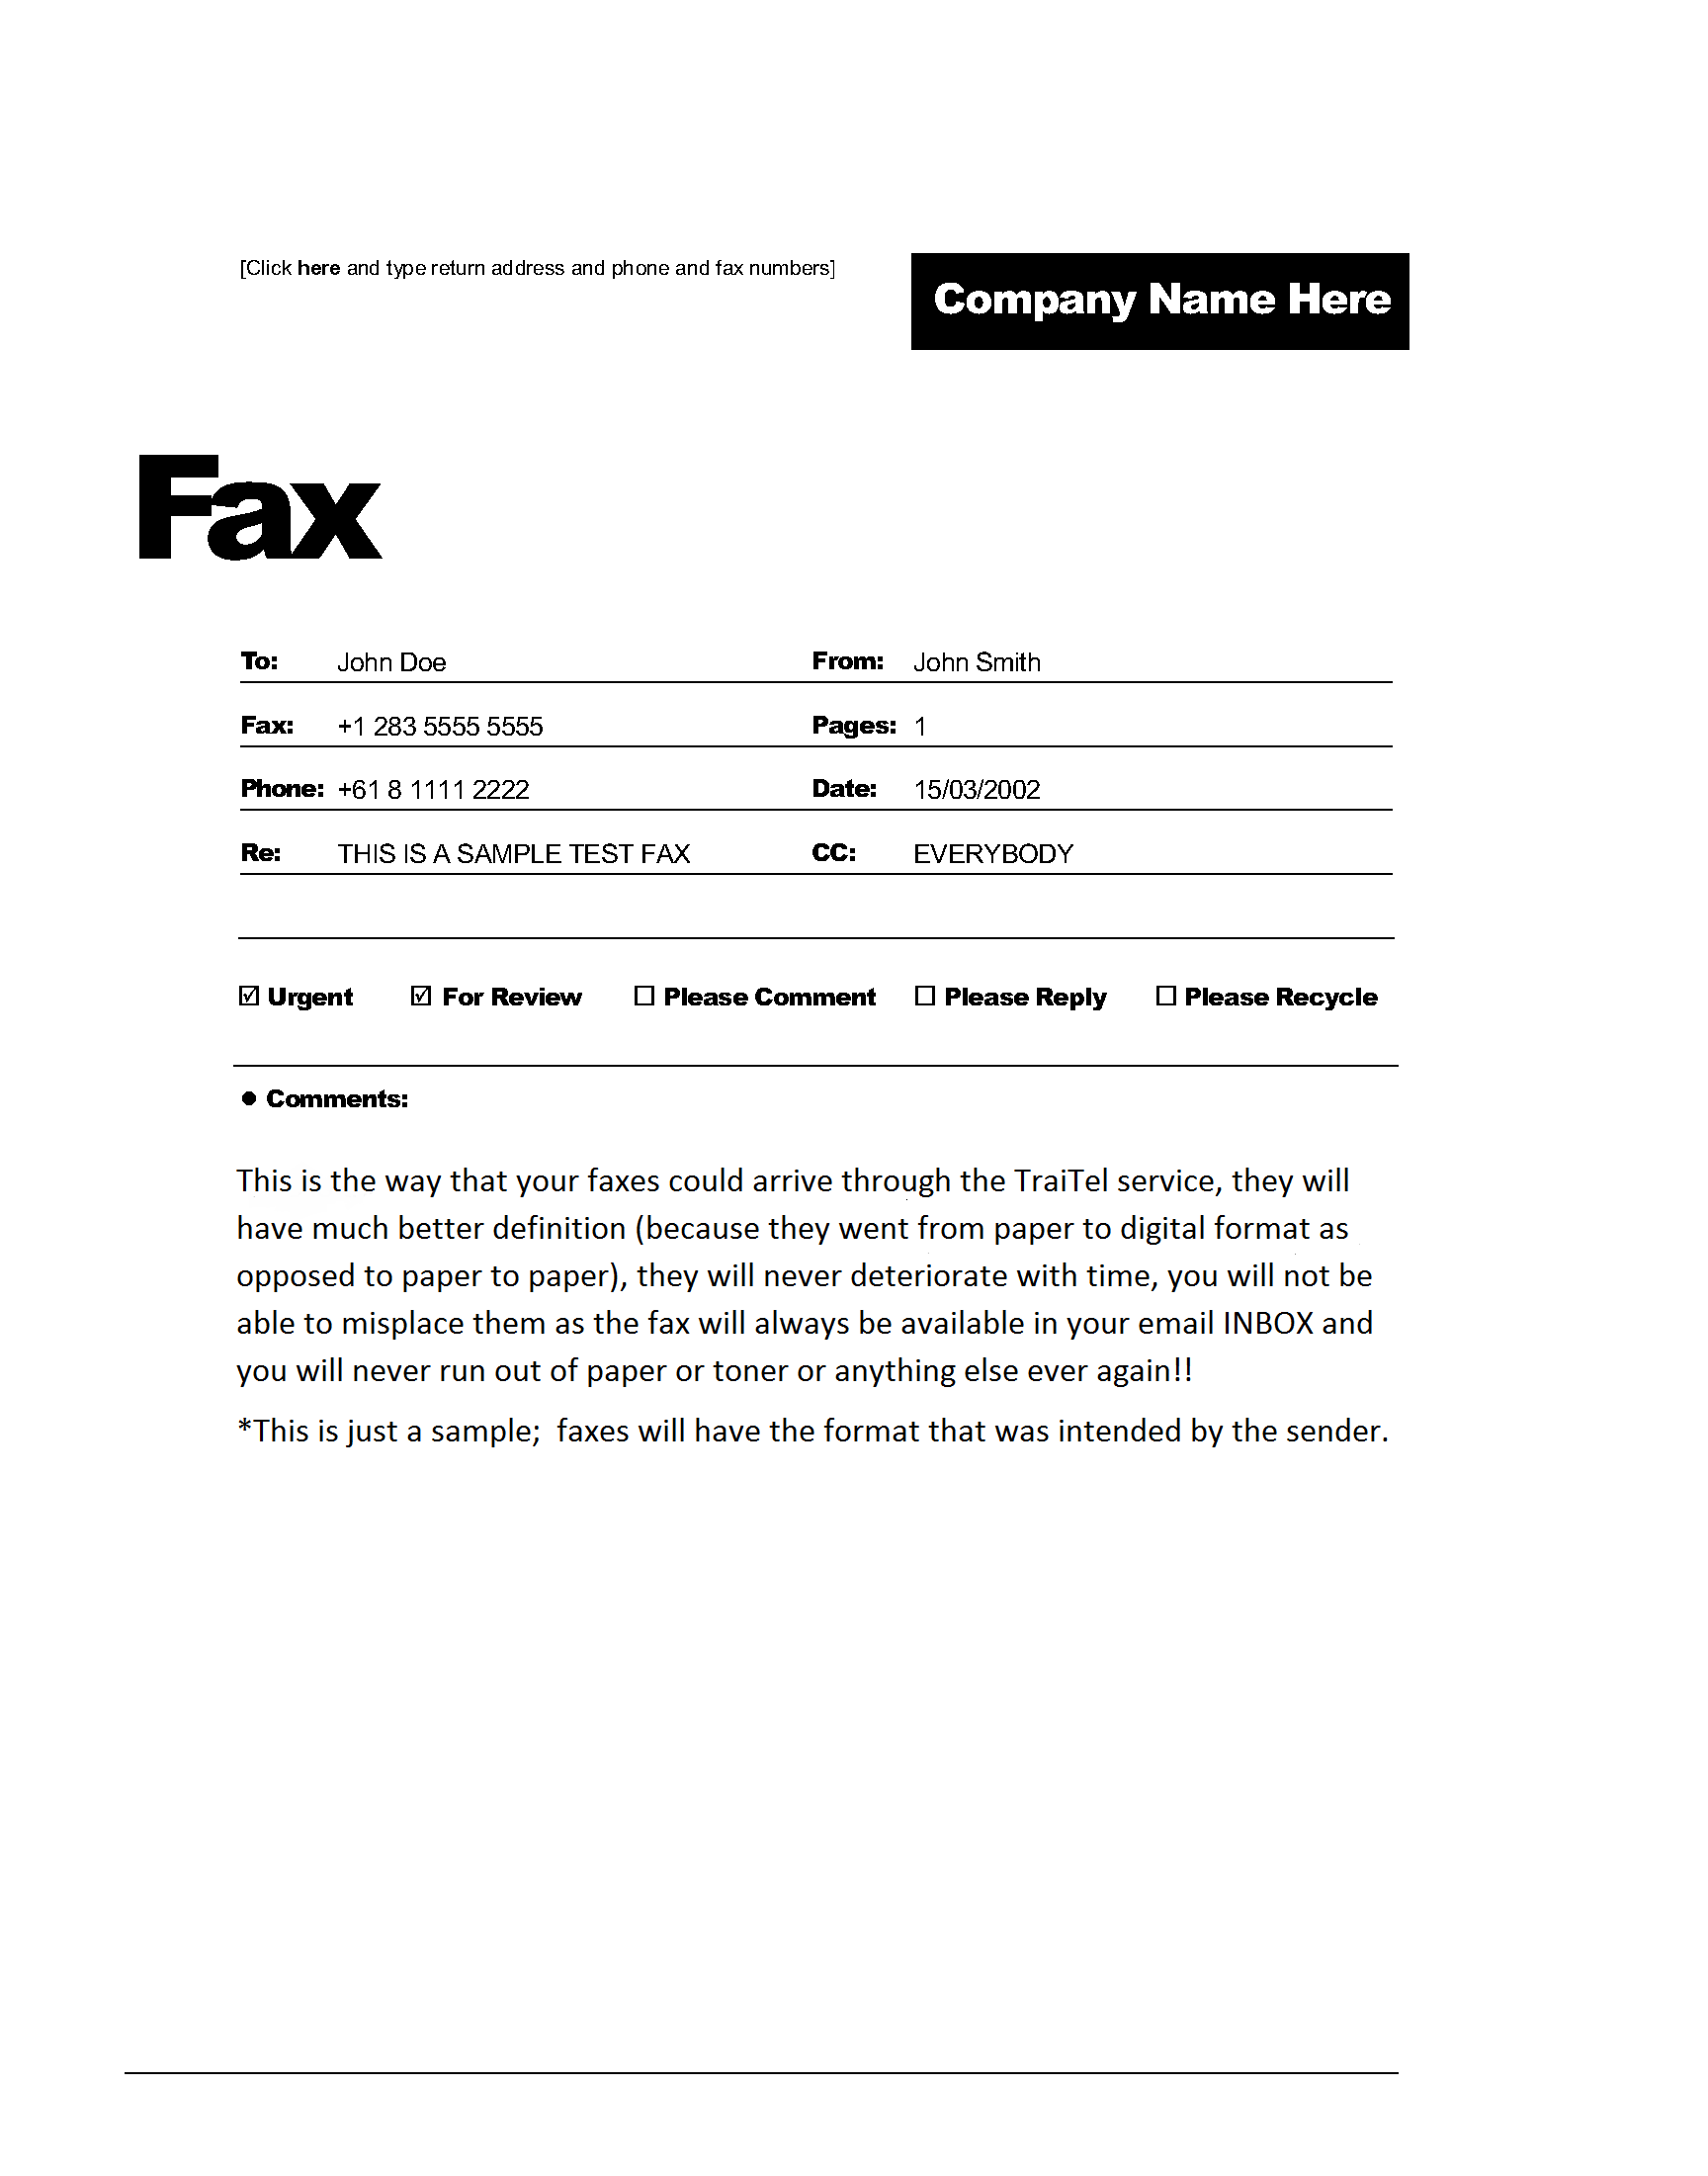 TraiTel: Business: Business Fax to Email